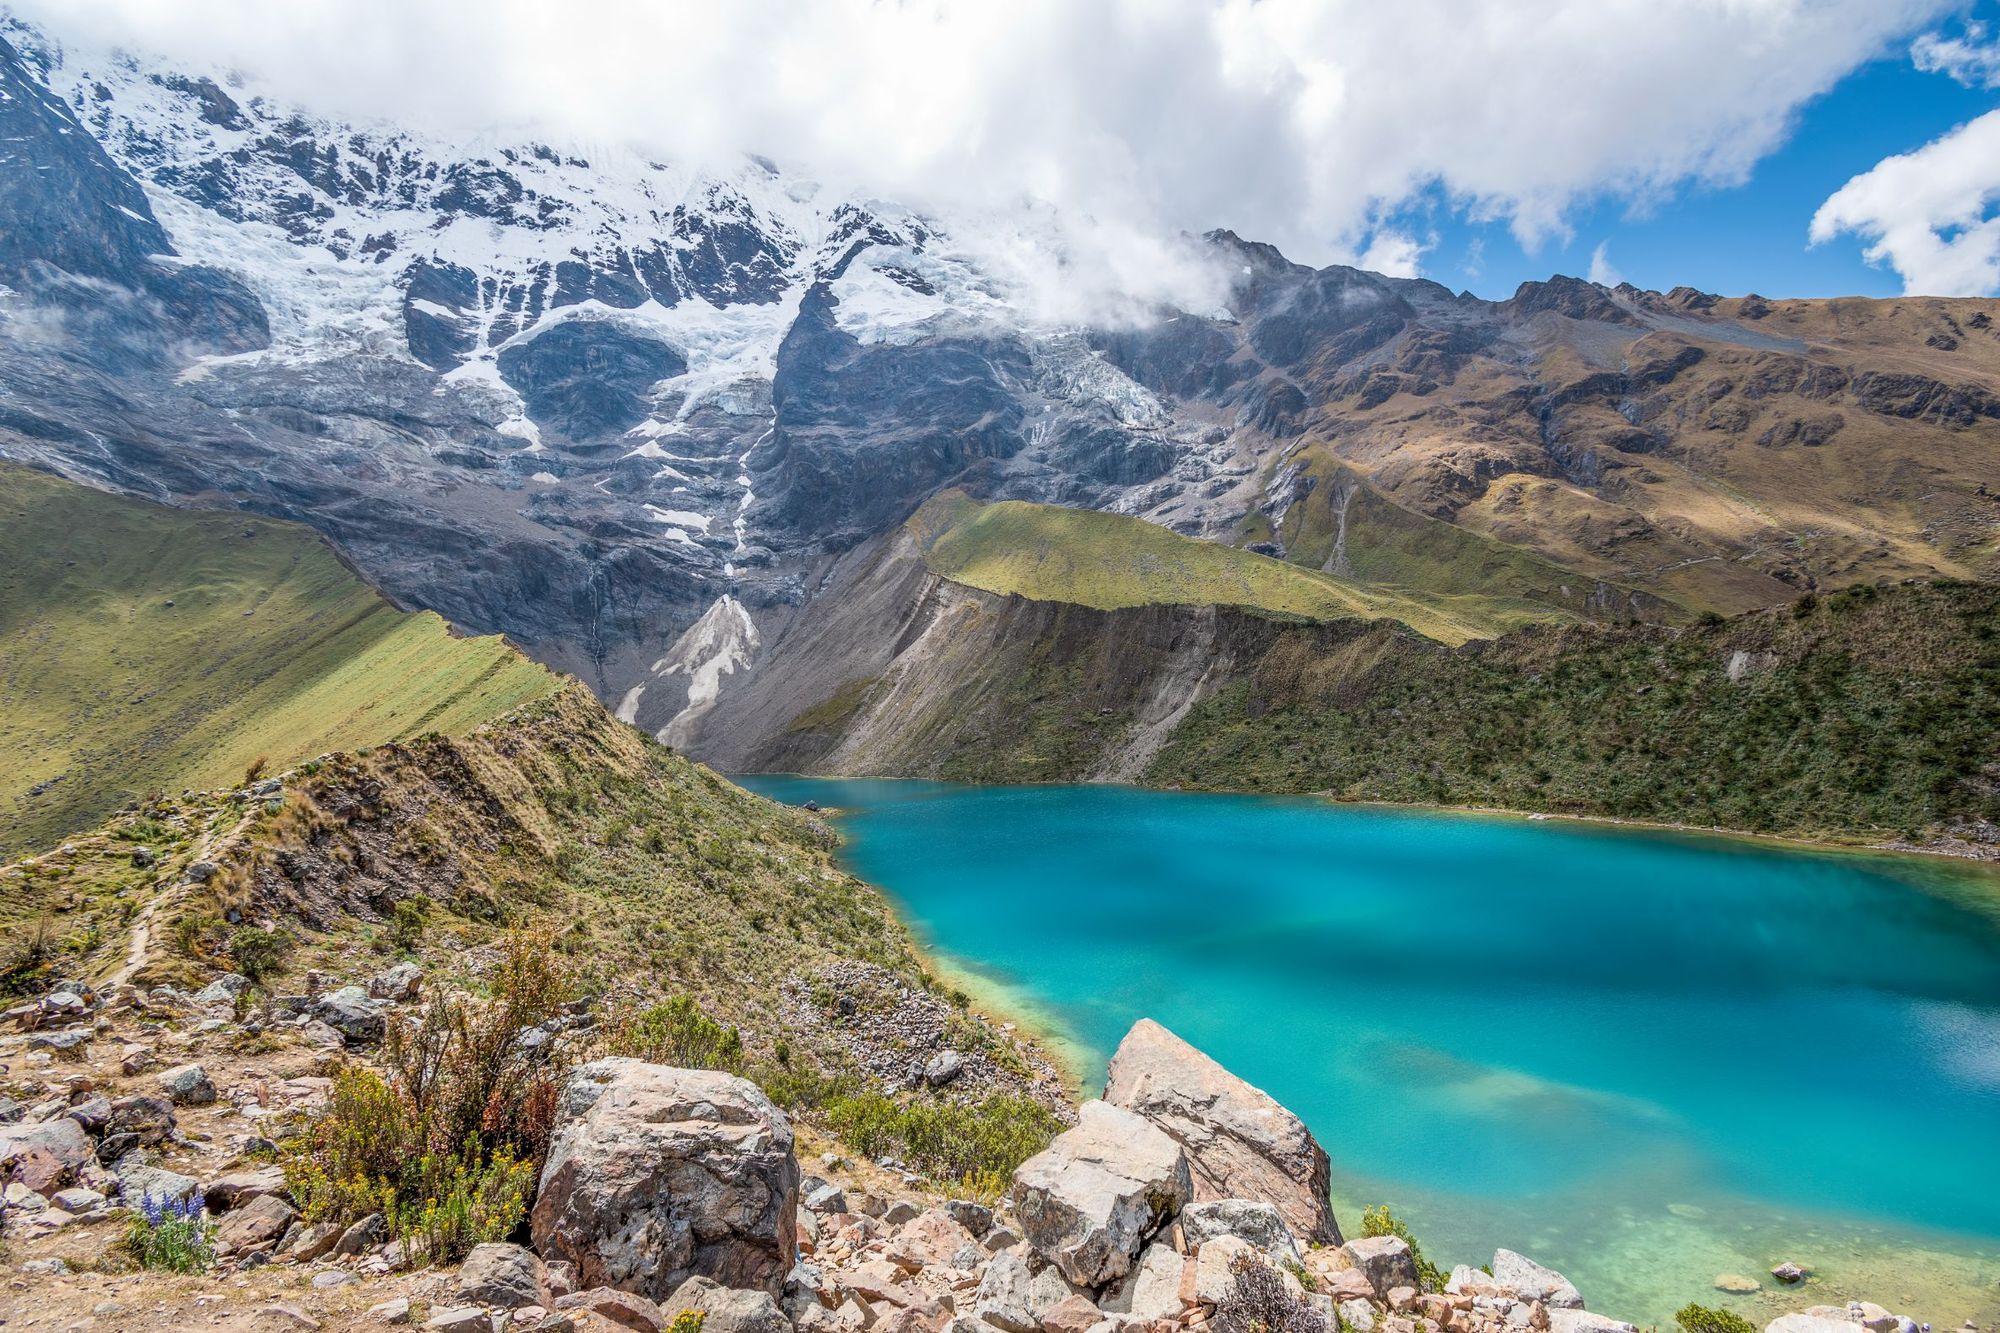 The turquoise colours of Humanatay Lake, sitting below the glacier on the Salkantay Trek. Photo: Getty